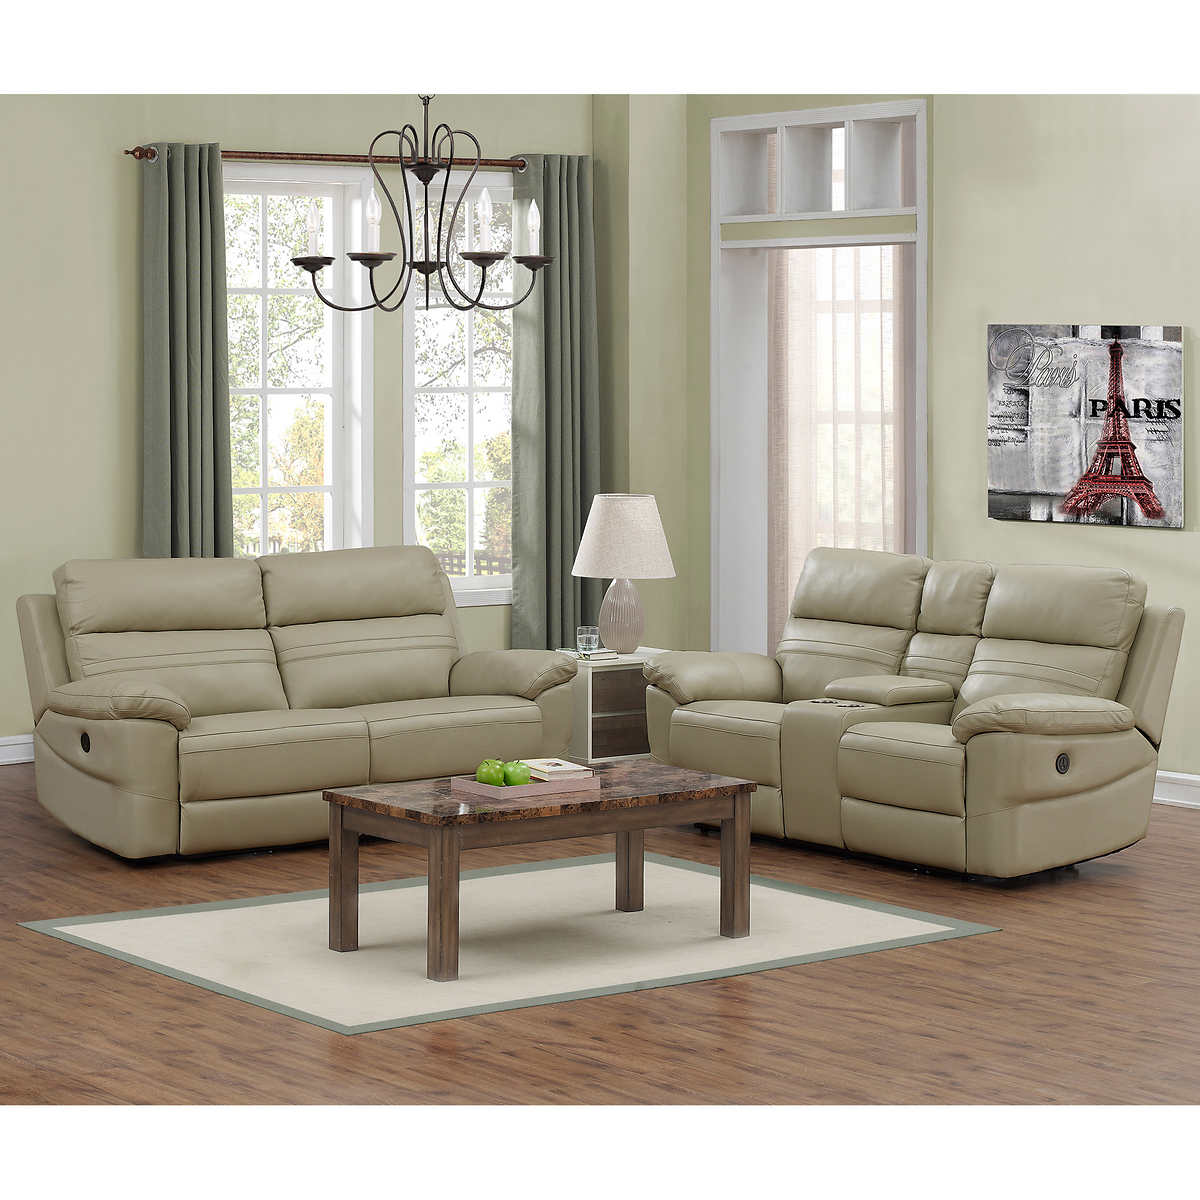 Rockhill 2 Piece Top Grain Leather Power Reclining Living Room Set